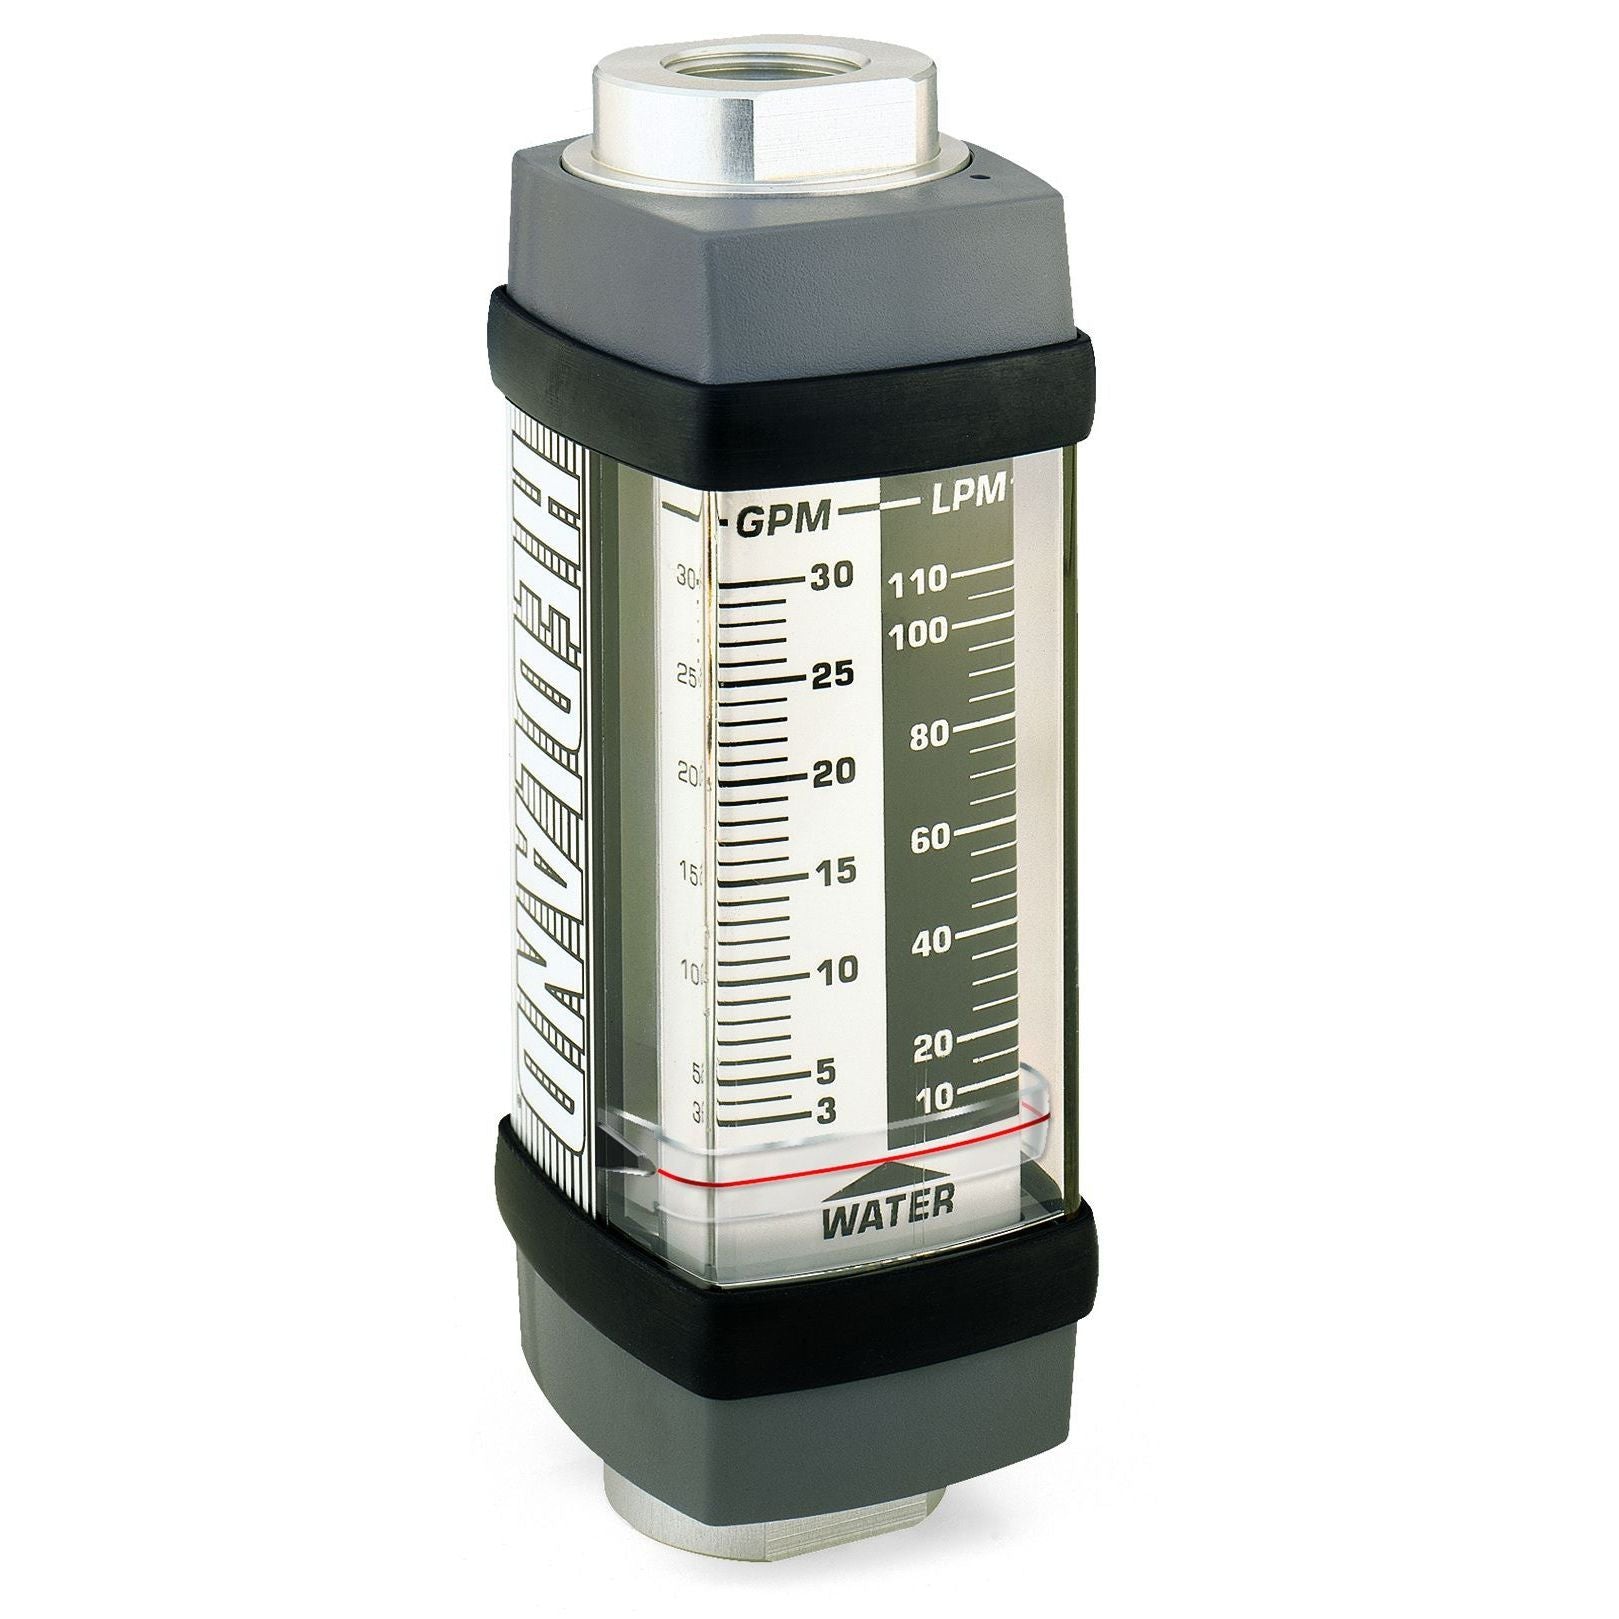 H231X-010 : Hedland 6000psi 316SS Flow Meter for Caustic or Corrosive Liquids, 1/4 NPT, 0.1 to 1.0 GPM